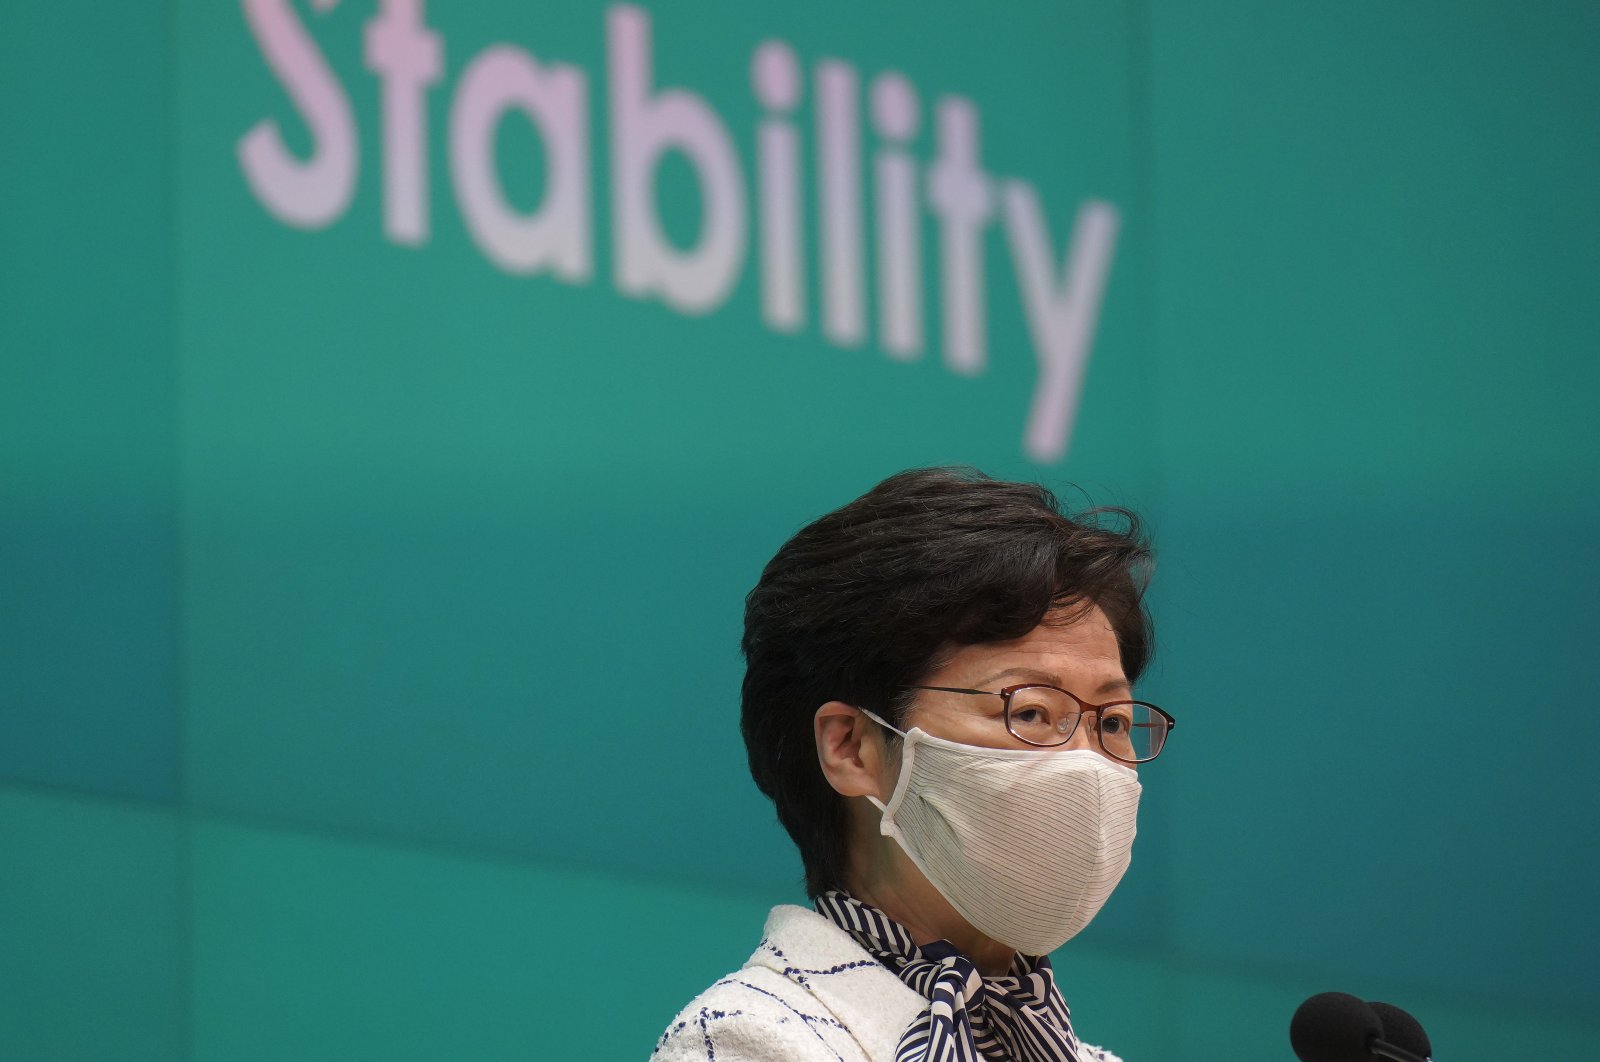 Hong Kong Chief Executive Carrie Lam listens to reporters' questions during a press conference. Hong Kong, June 16, 2020. (AP Photo)